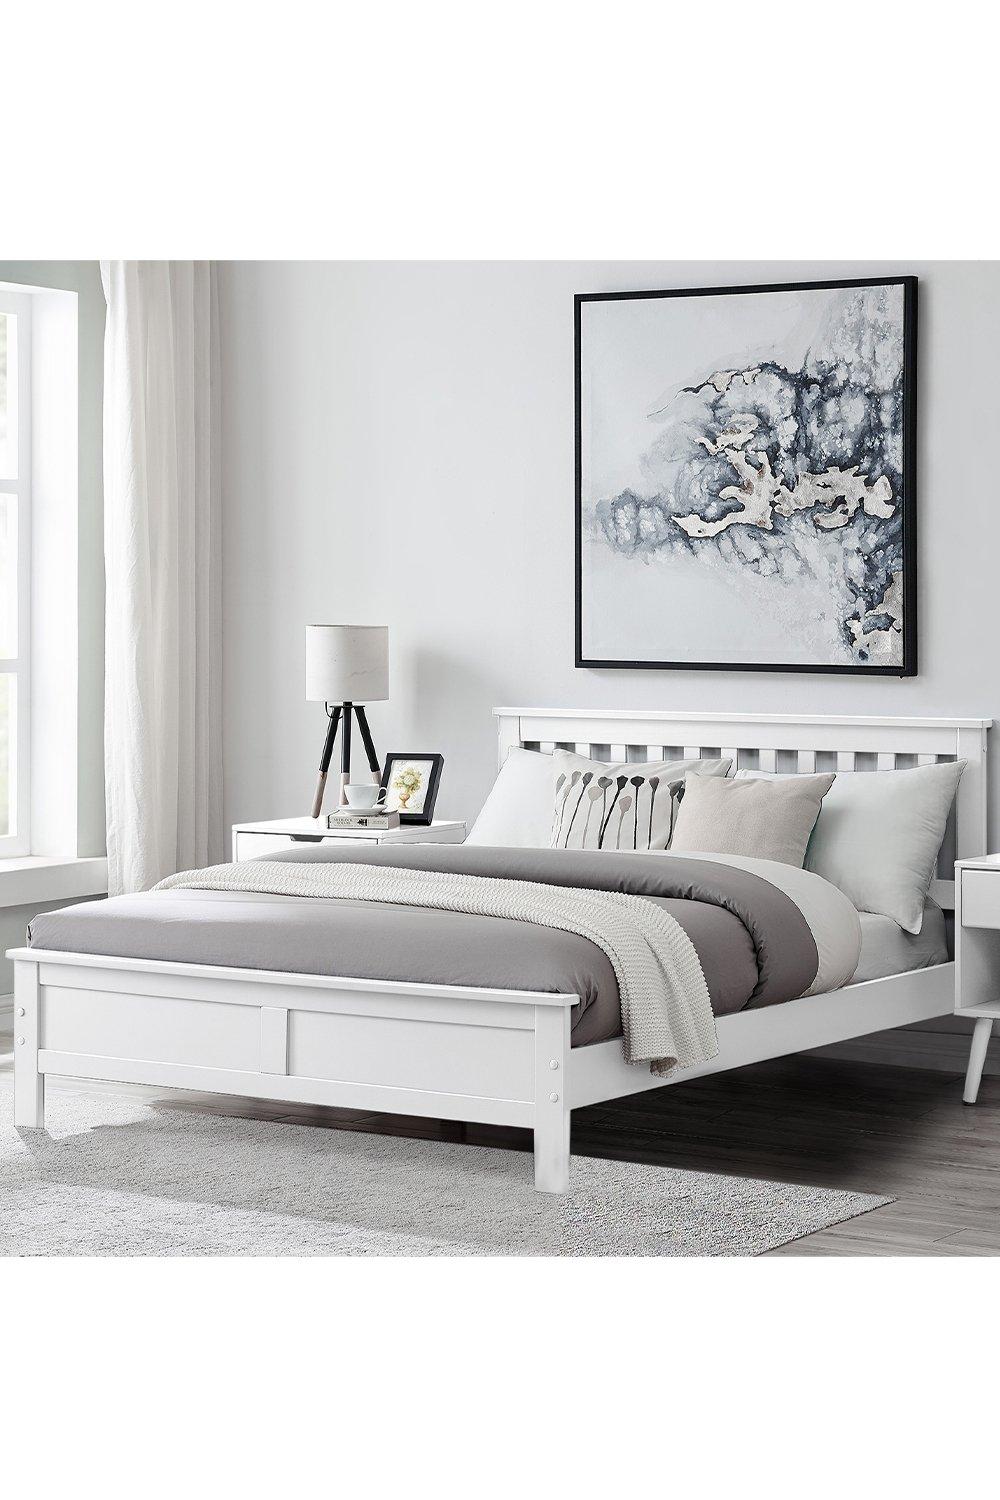 azure white wooden solid pine quality double bed frame (bed frame only) modern simple design